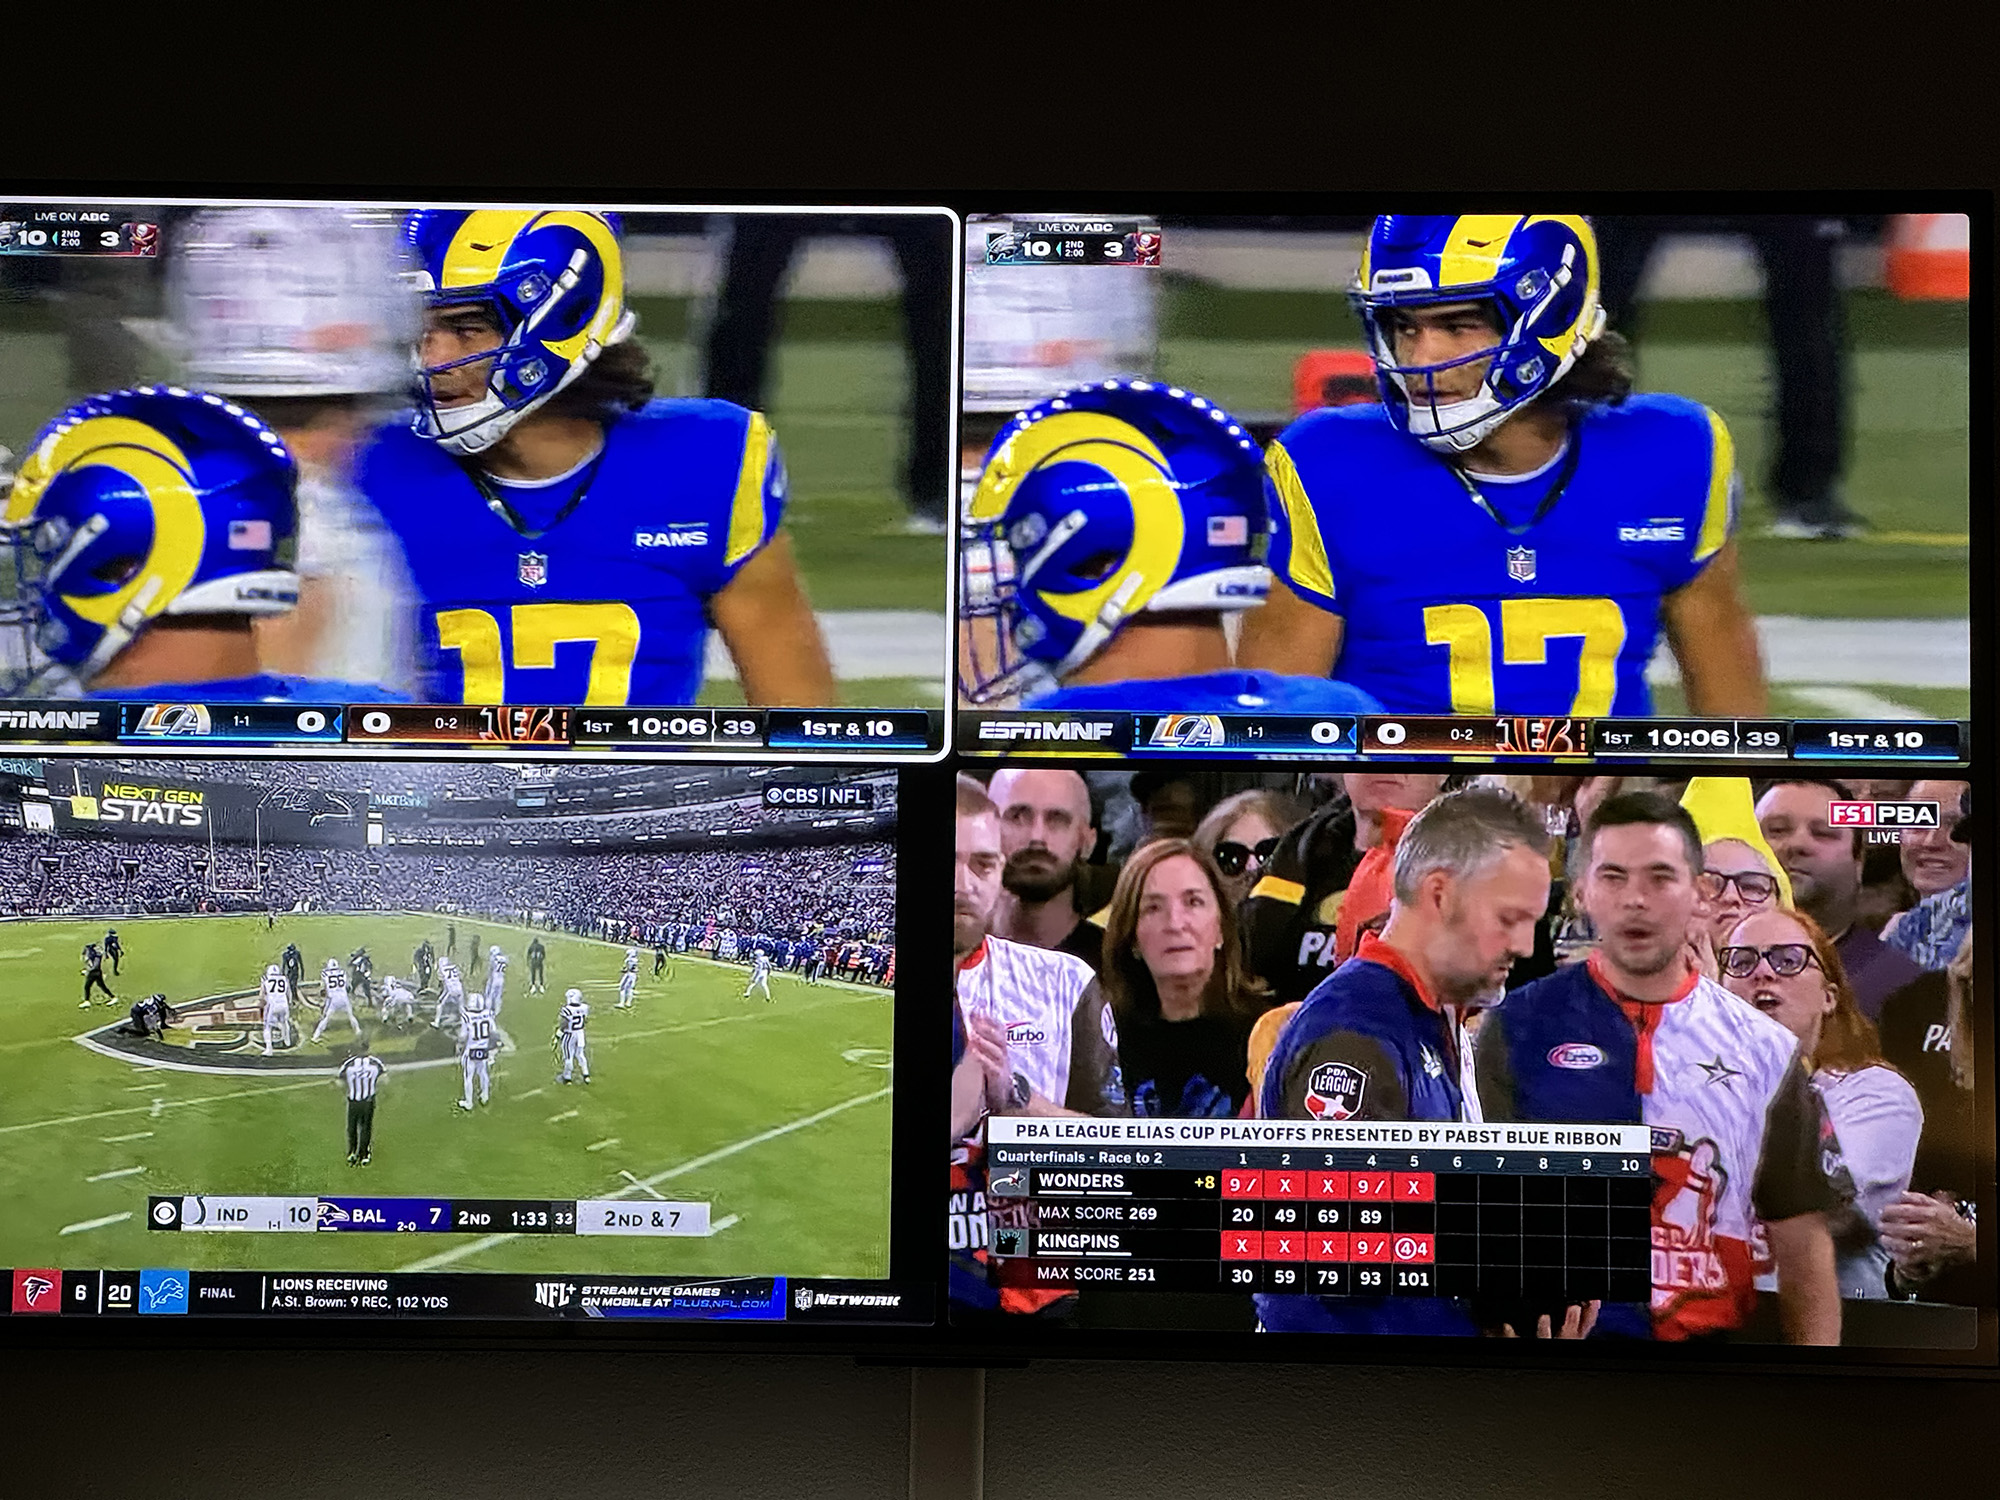 TV Now Offers NFL Multiview Showing 4 Game At Once - Here is  Everything You Need to Know About Multiview For NFL Sunday Ticket